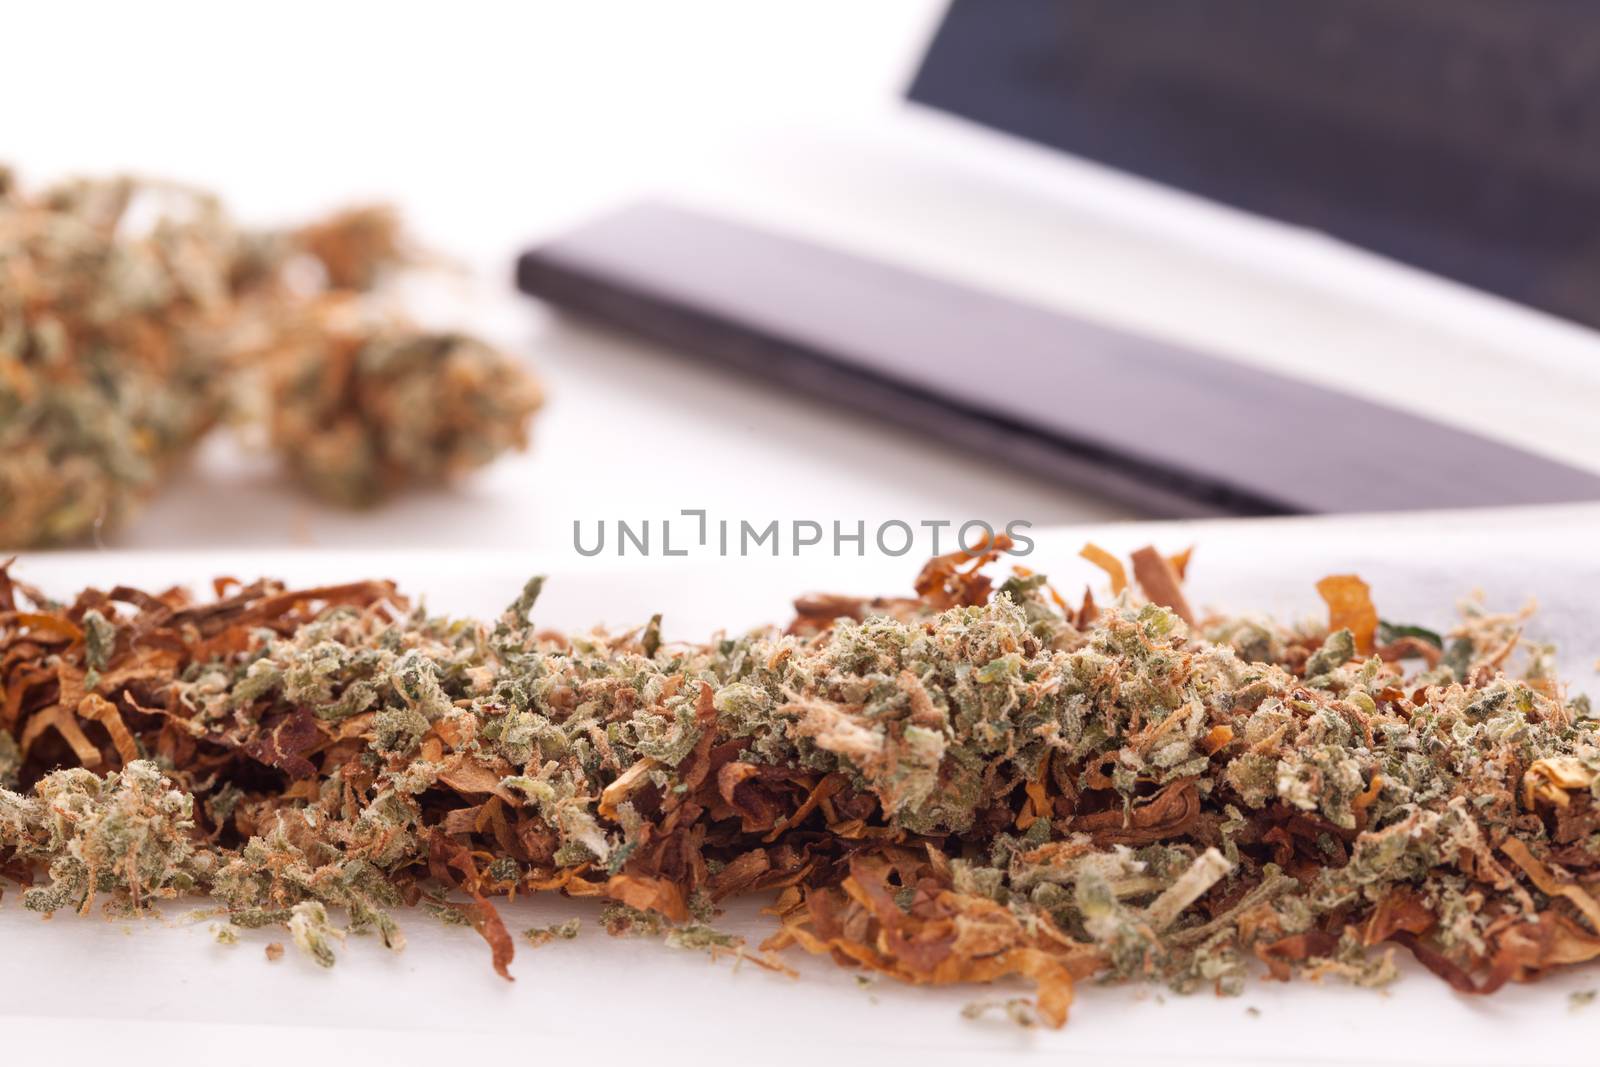 Dried Cannabis on Rolling Paper with Filter by juniart